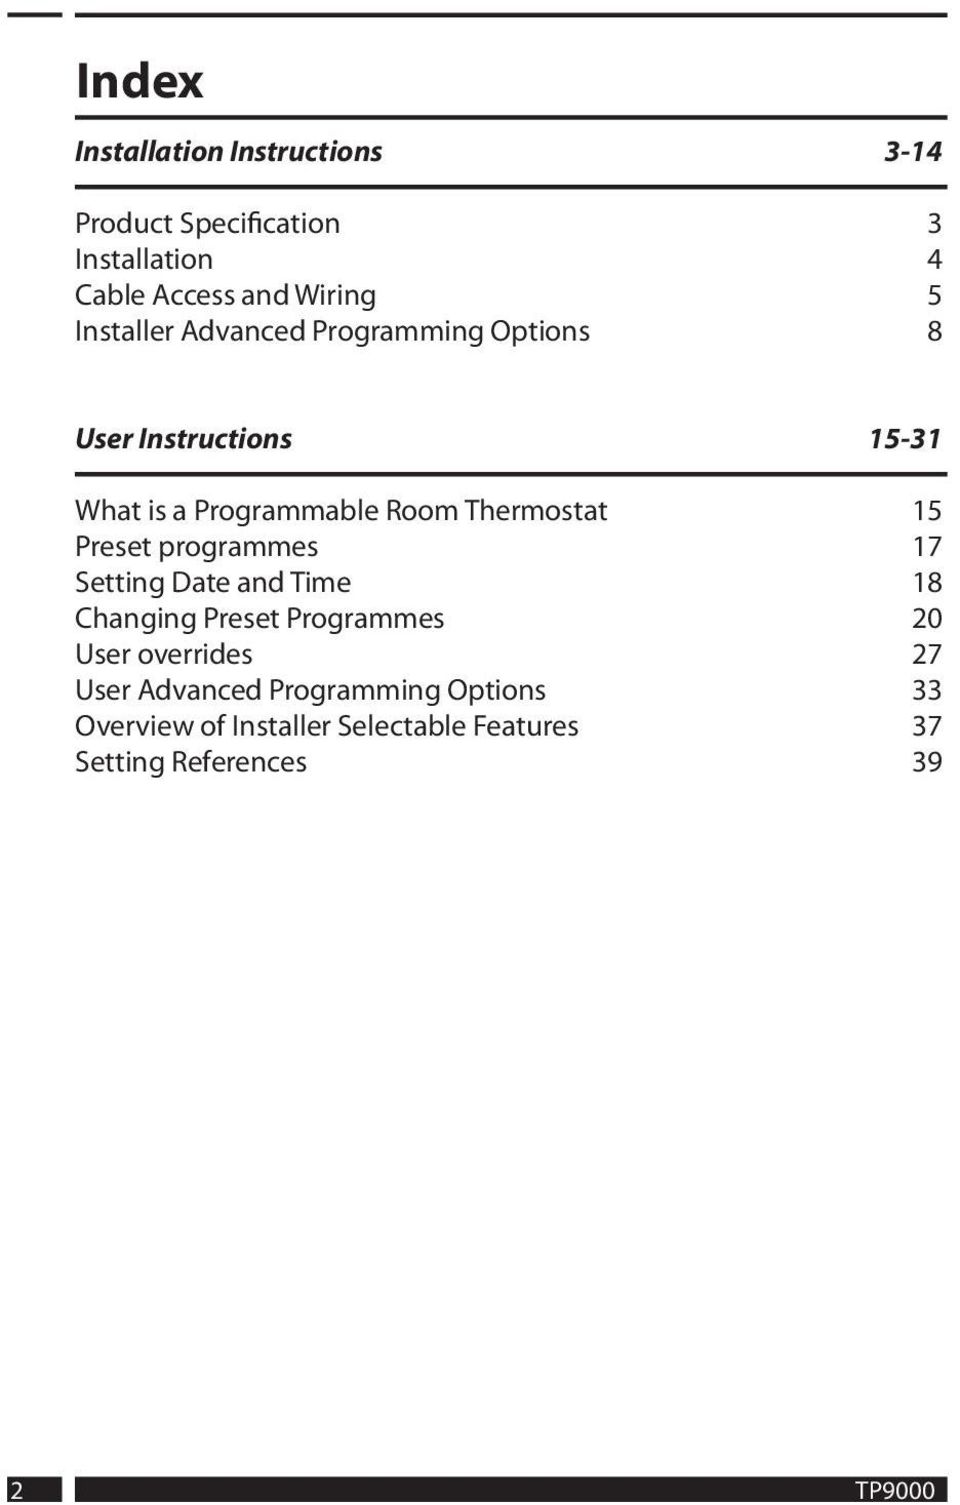 15 Preset programmes 17 Setting Date and Time 18 Changing Preset Programmes 20 User overrides 27 User